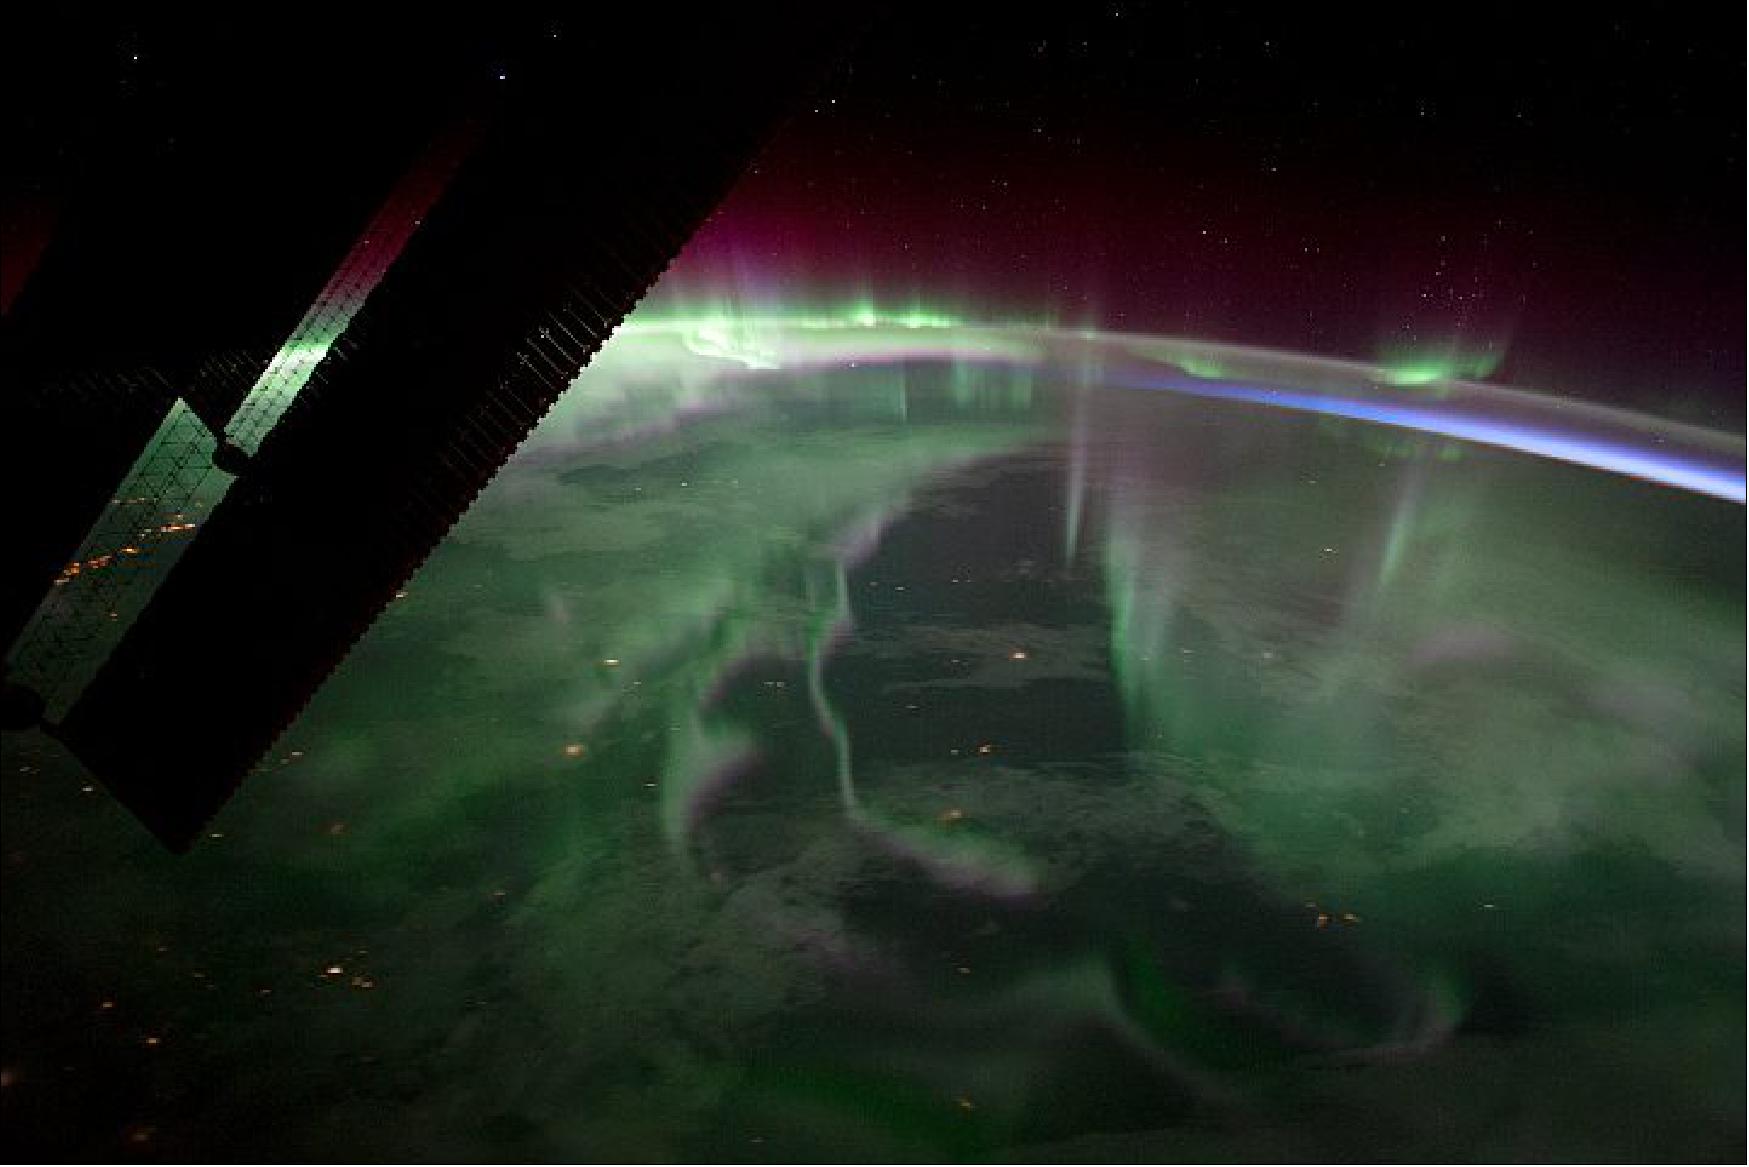 Figure 124: Astronauts have snapped numerous photos of the light show from their unique perch on the International Space Station. Astronaut Randy "Komrade" Bresnik shot this photograph on September 15, 2017, as the space station passed over Ontario, Canada. Curtains of green—the most familiar color of auroras—dominate the light show, with hints of purple and red. This astronaut photograph ISS053-E- 23965 was acquired with a Nikon D4 digital camera using a 24 mm lens and is provided by the ISS Crew Earth Observations Facility and the Earth Science and Remote Sensing Unit, Johnson Space Center (image credit: NASA Earth Observatory, story by Kathryn Hansen)